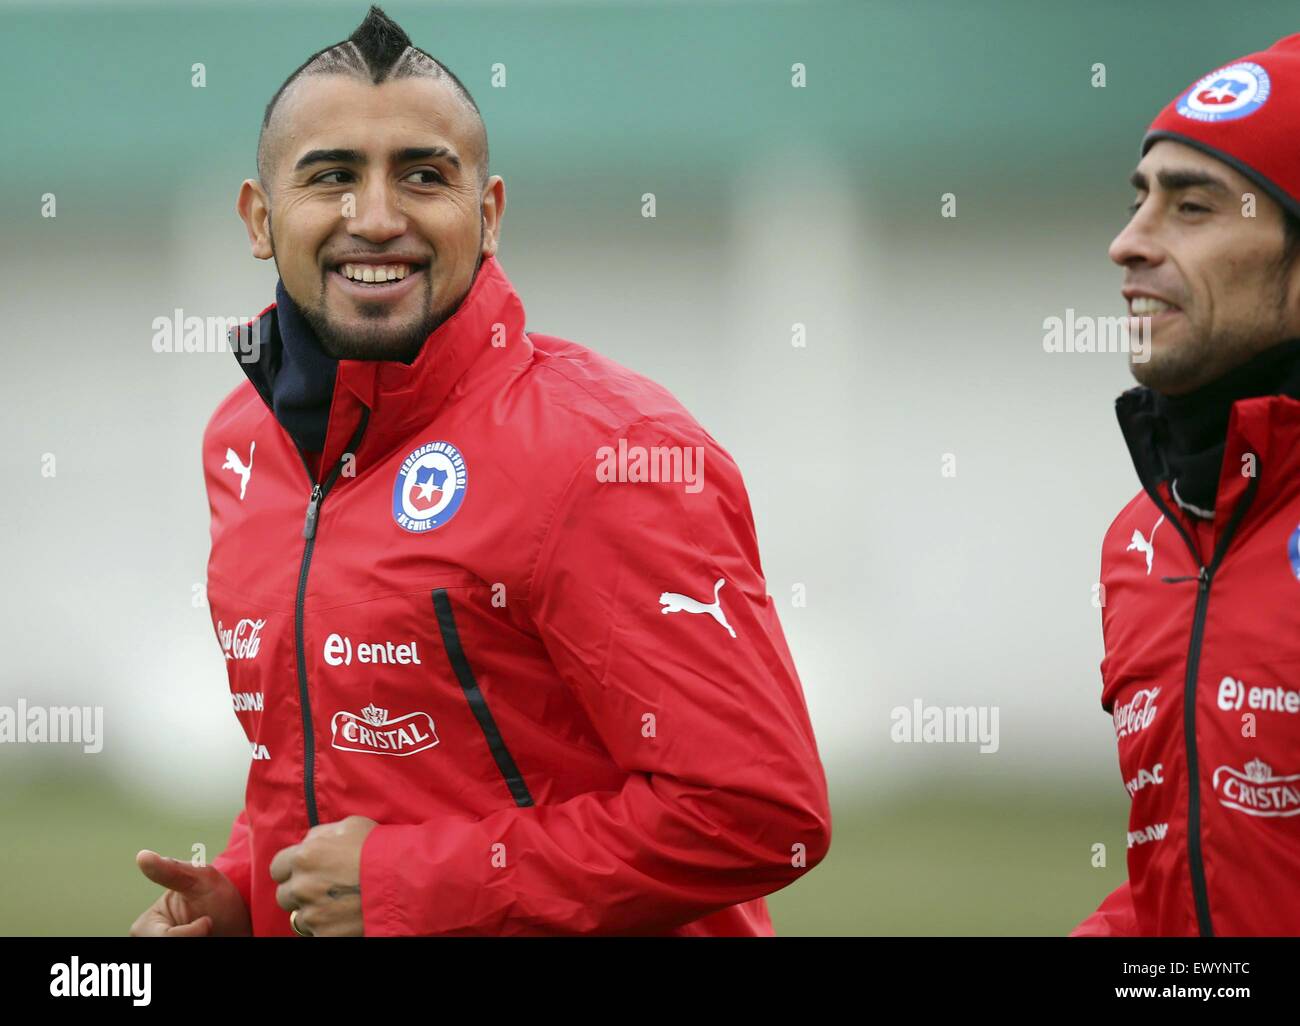 Santiago, Chile. 2nd July, 2015. Chile's Arturo Vidal (L) and Jorge Valdivia attend a training session in Santiago, Chile, on July 2, 2015. Chile will face Argentina in the final match of the America Cup Chile 2015 on Saturday. © Juan Roleri/TELAM/Xinhua/Alamy Live News Stock Photo